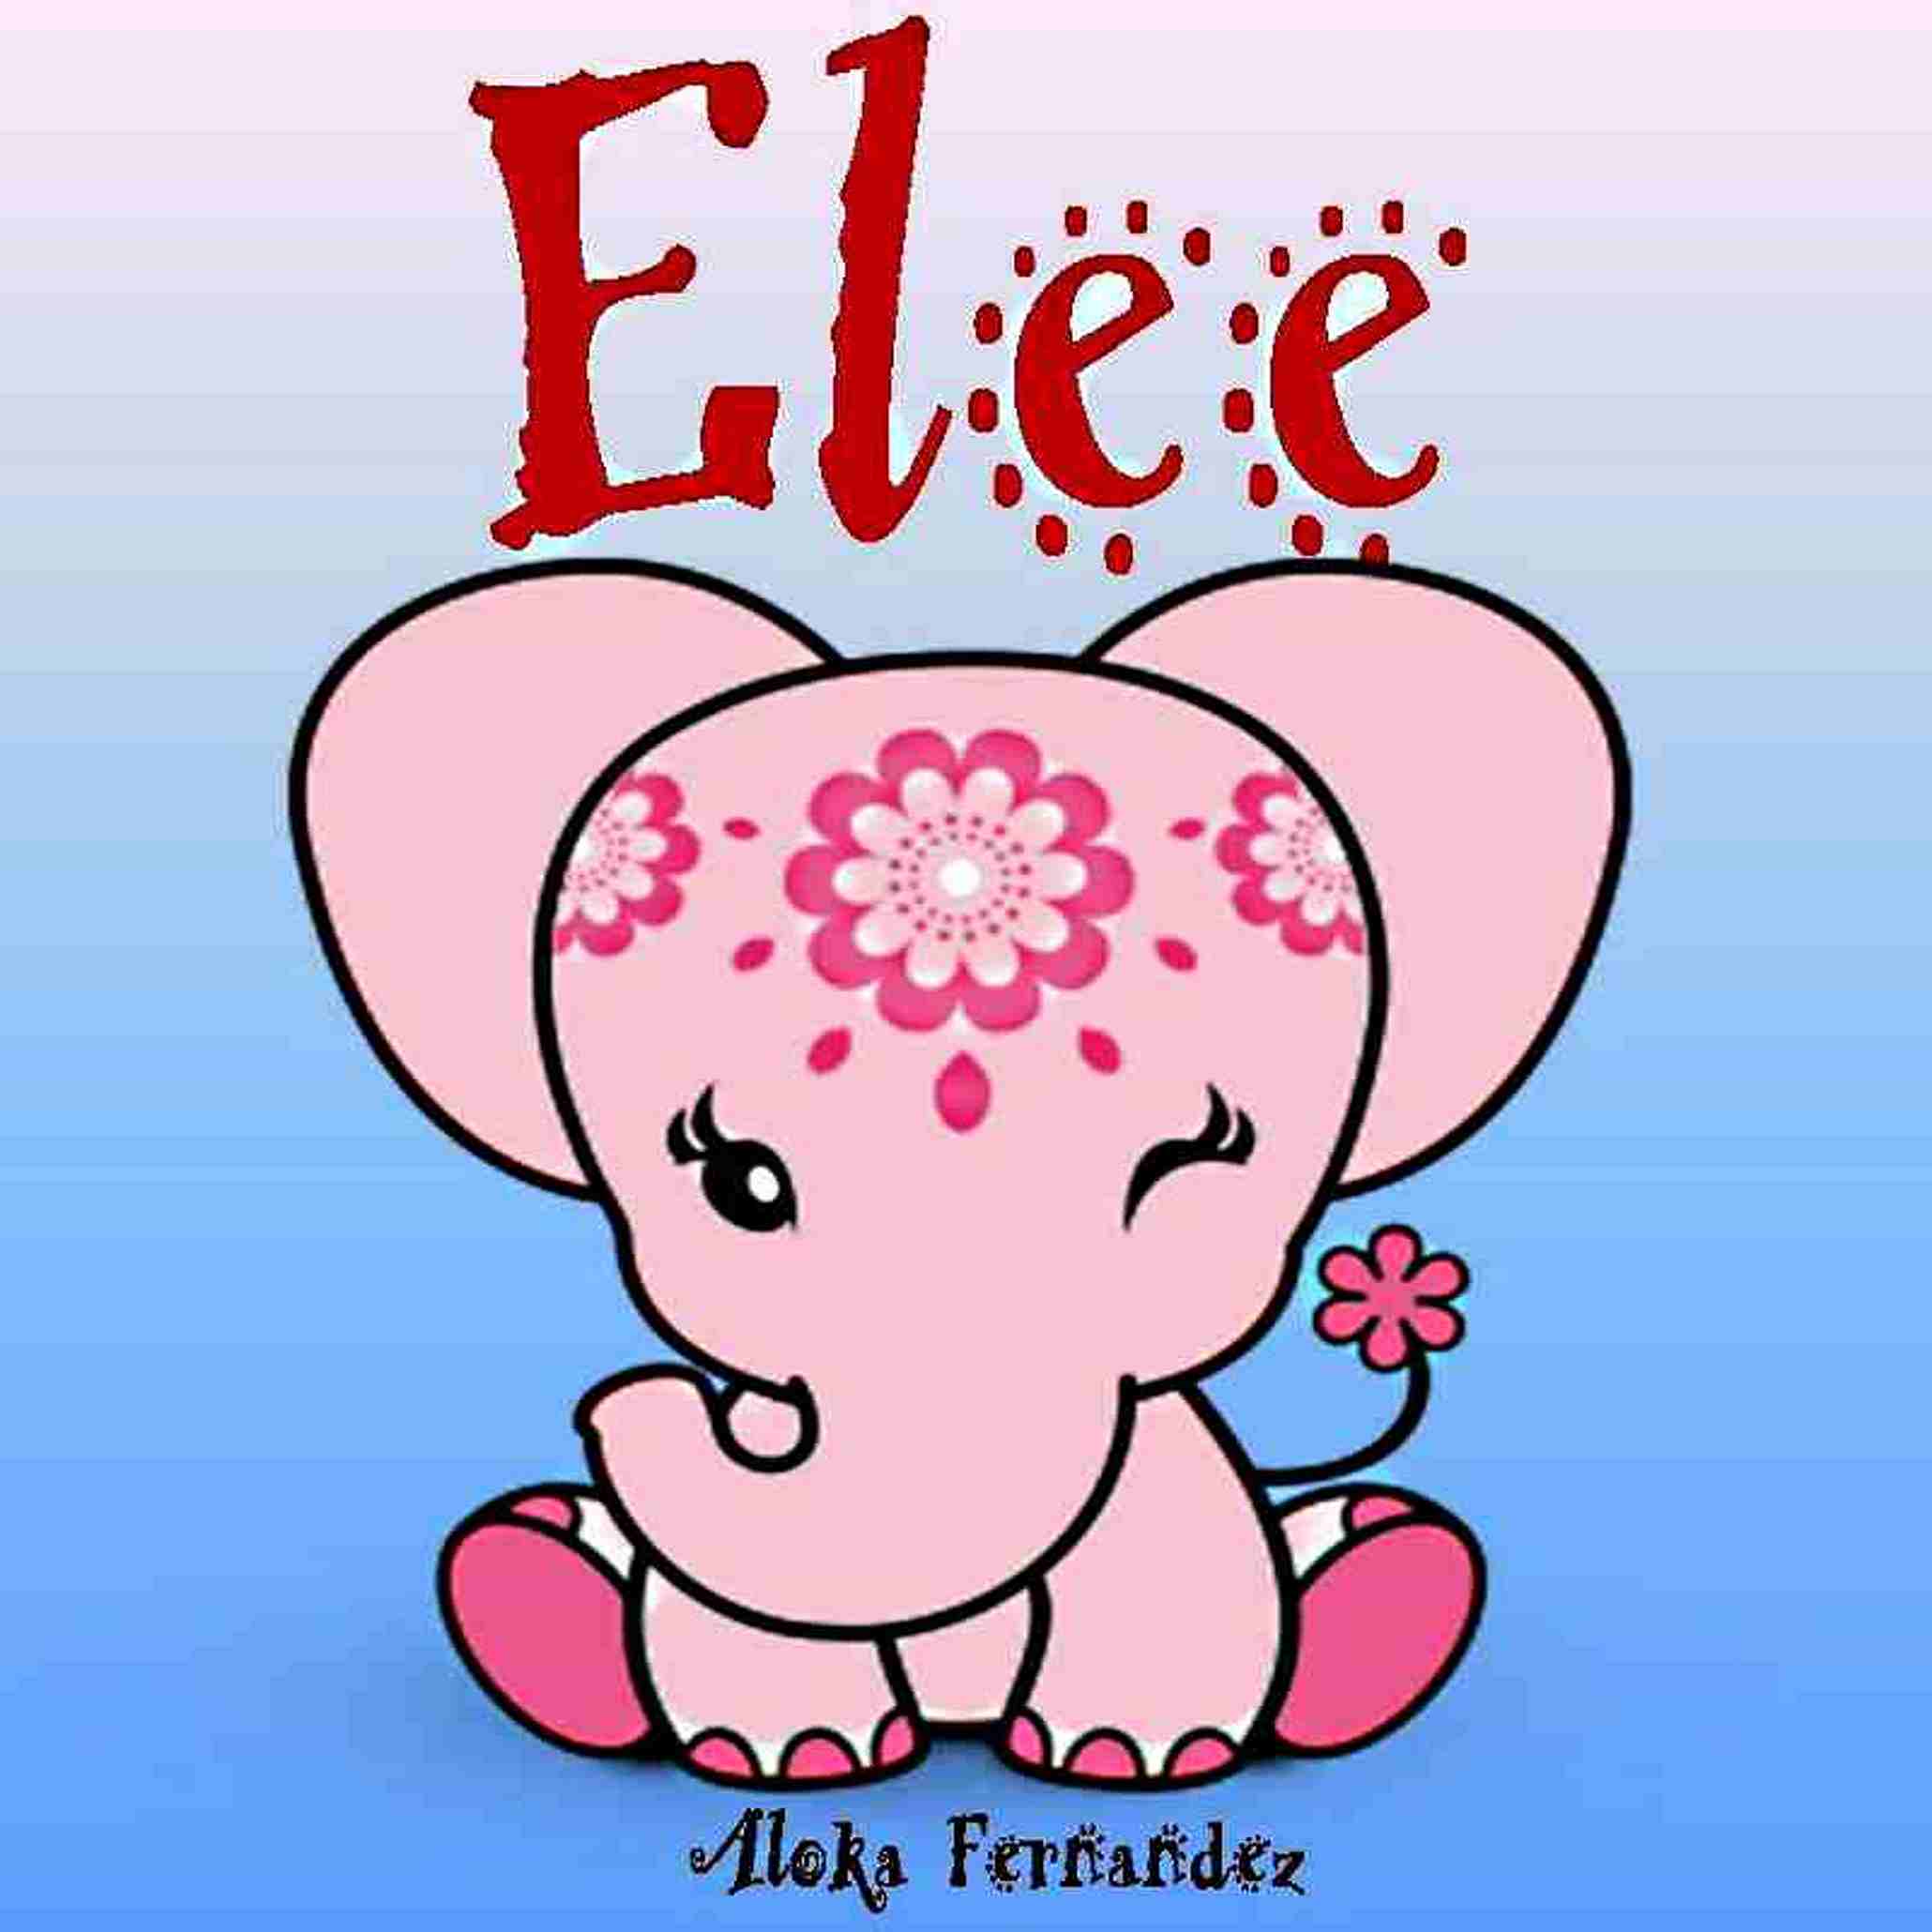 FREE: Children stories:”Elee”bedtime story for kids ages 3-5 (Perfect for Bedtime & Young Readers): Picture book for kids by Aloka Fernandez